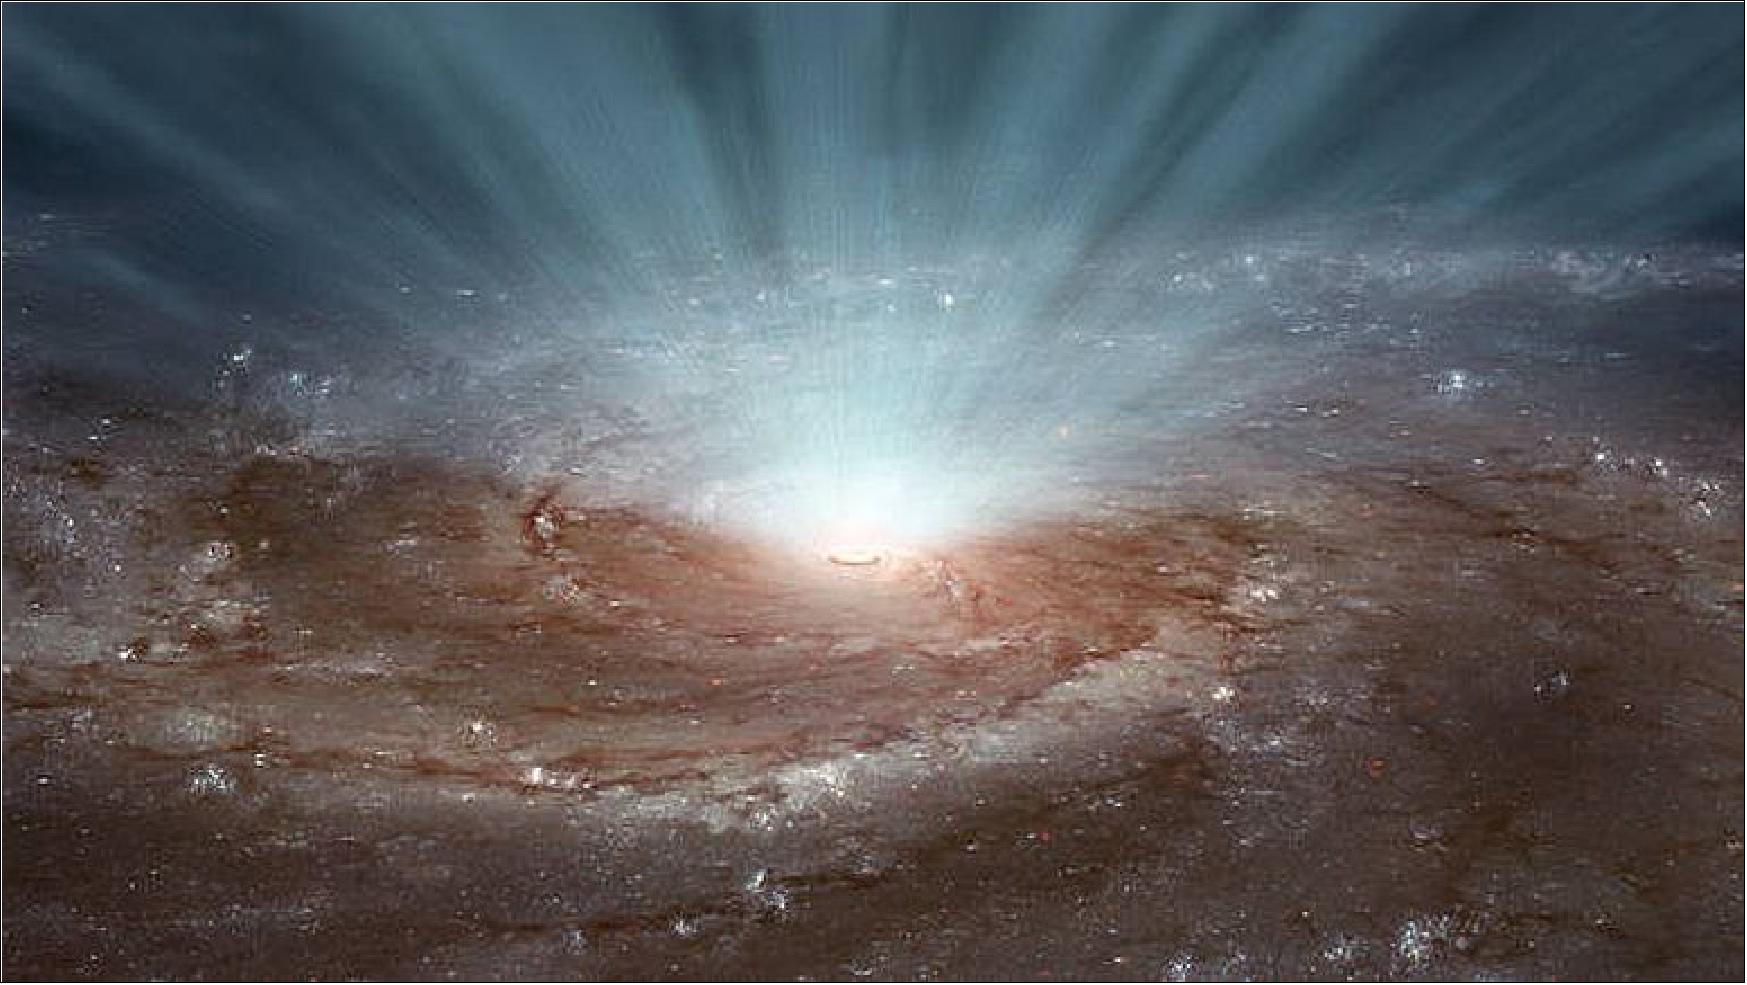 Figure 37: Artist's rendition of suppermassive black holes at the cores of galaxies blast out radiation and ultra-fast winds as observed by NASA's NuSTAR and ESA's XMM-Newton missions (image credit: NASA/JPL-Caltech, ESA)